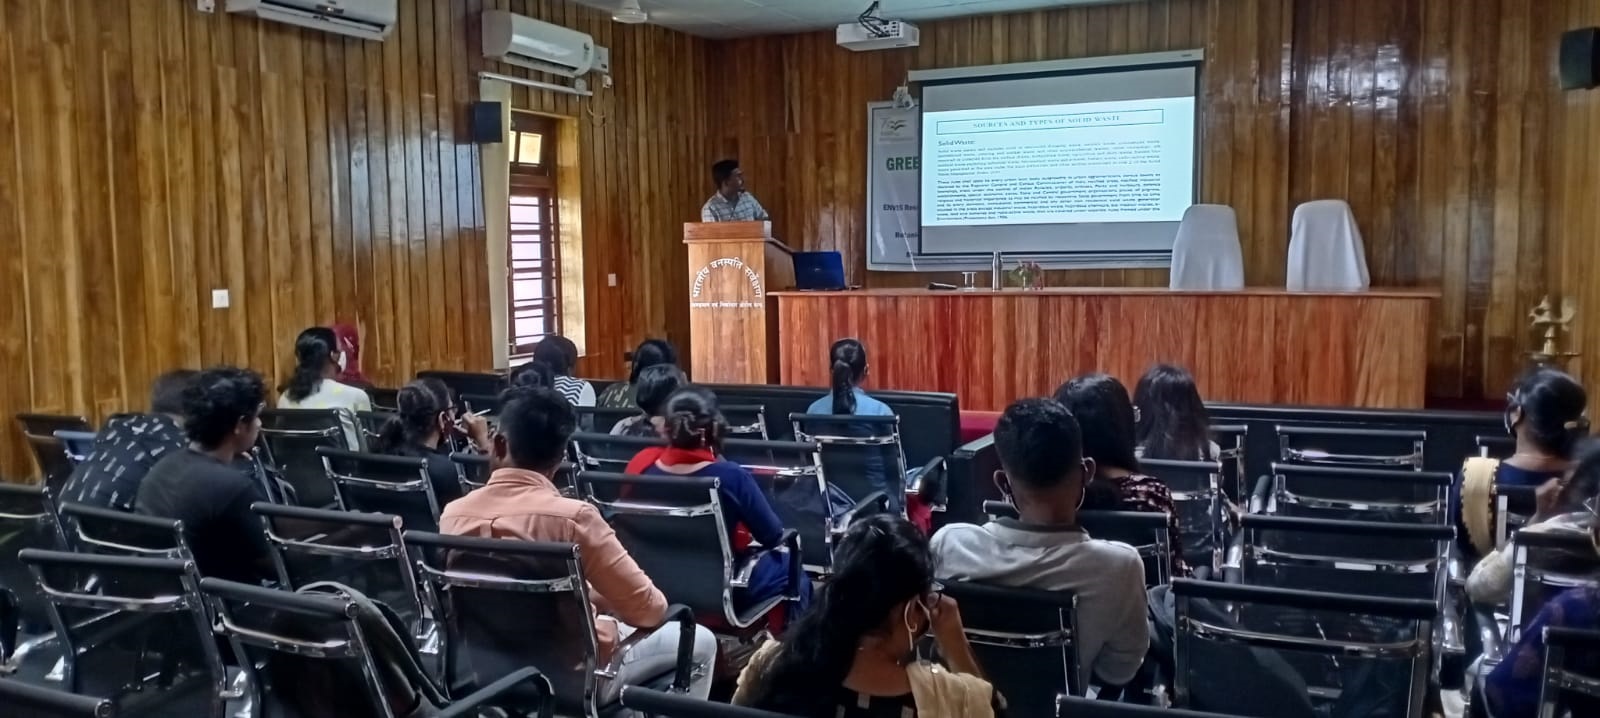 Lecture on Solid waste management and segregation of waste